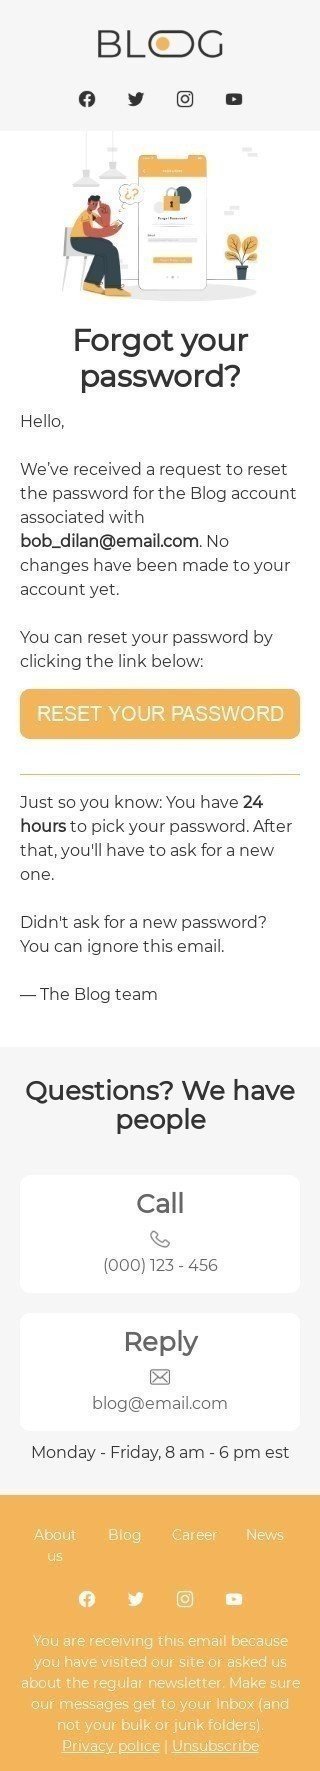 Trigger Email Template «Forgot password?» for Publications & Blogging industry mobile view